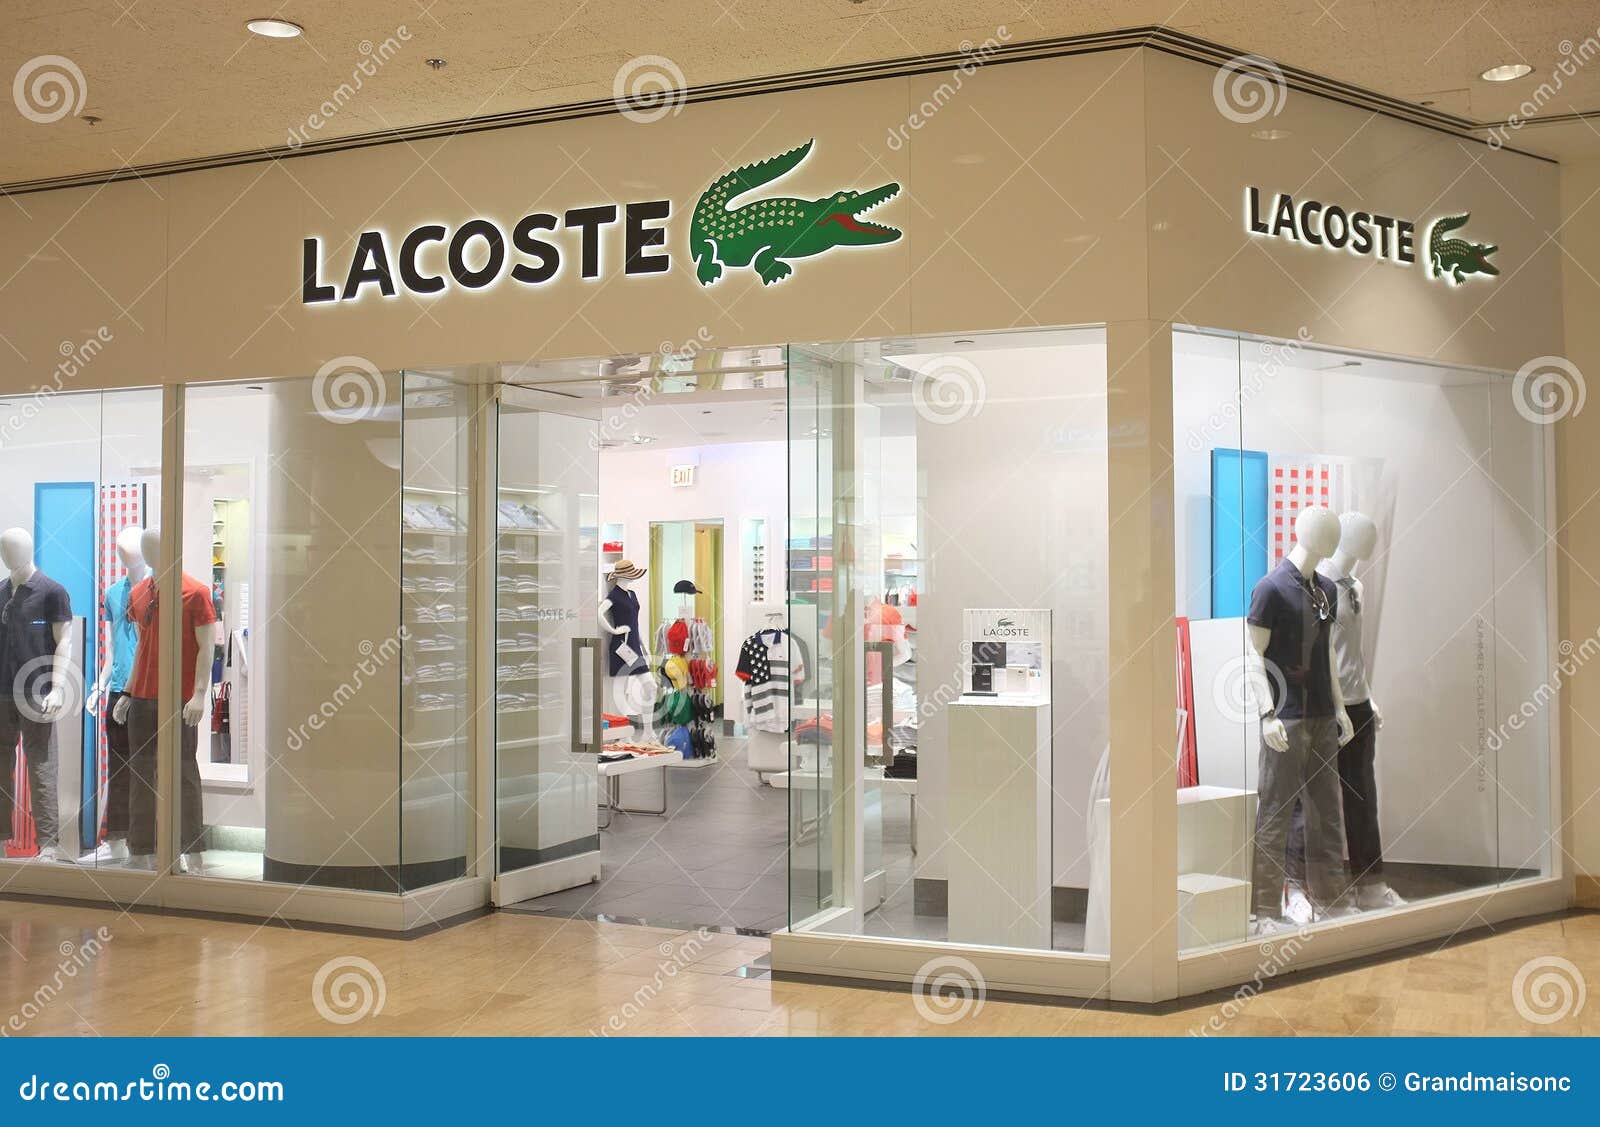 198 Lacoste Outlet Photos - Free 